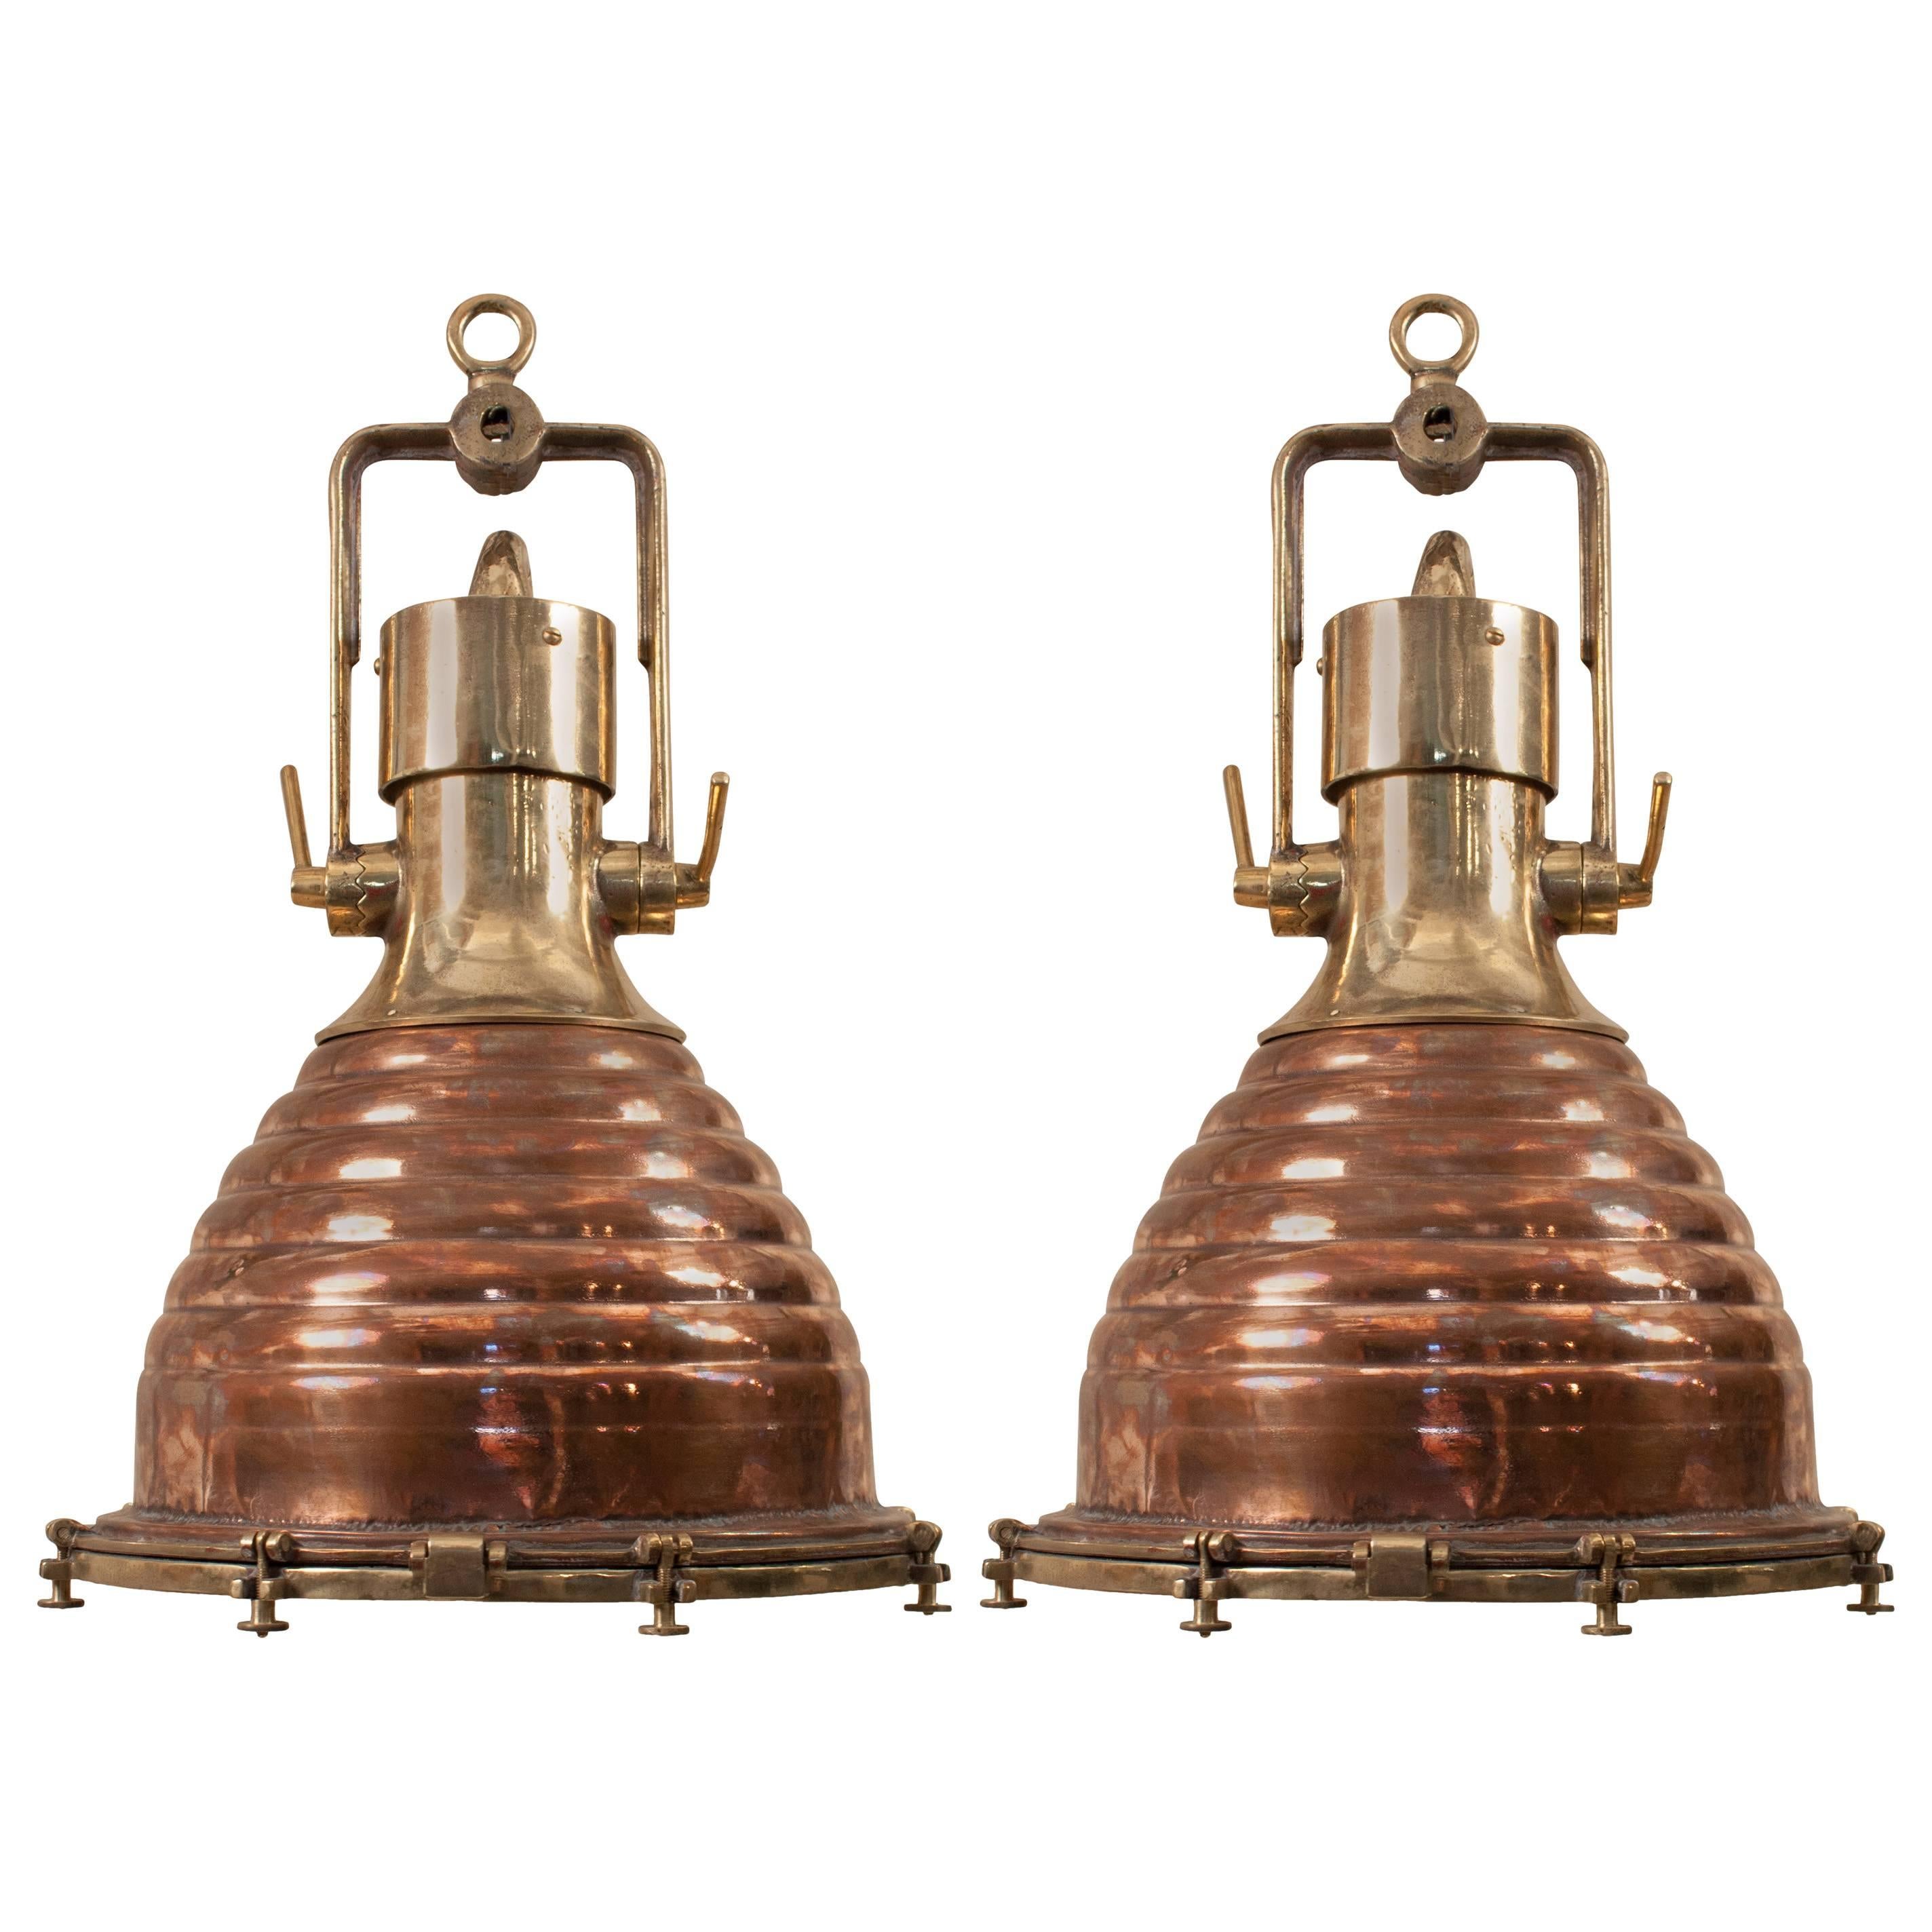 Pair of Large Copper and Brass "Beehive" Ship Deck Lights